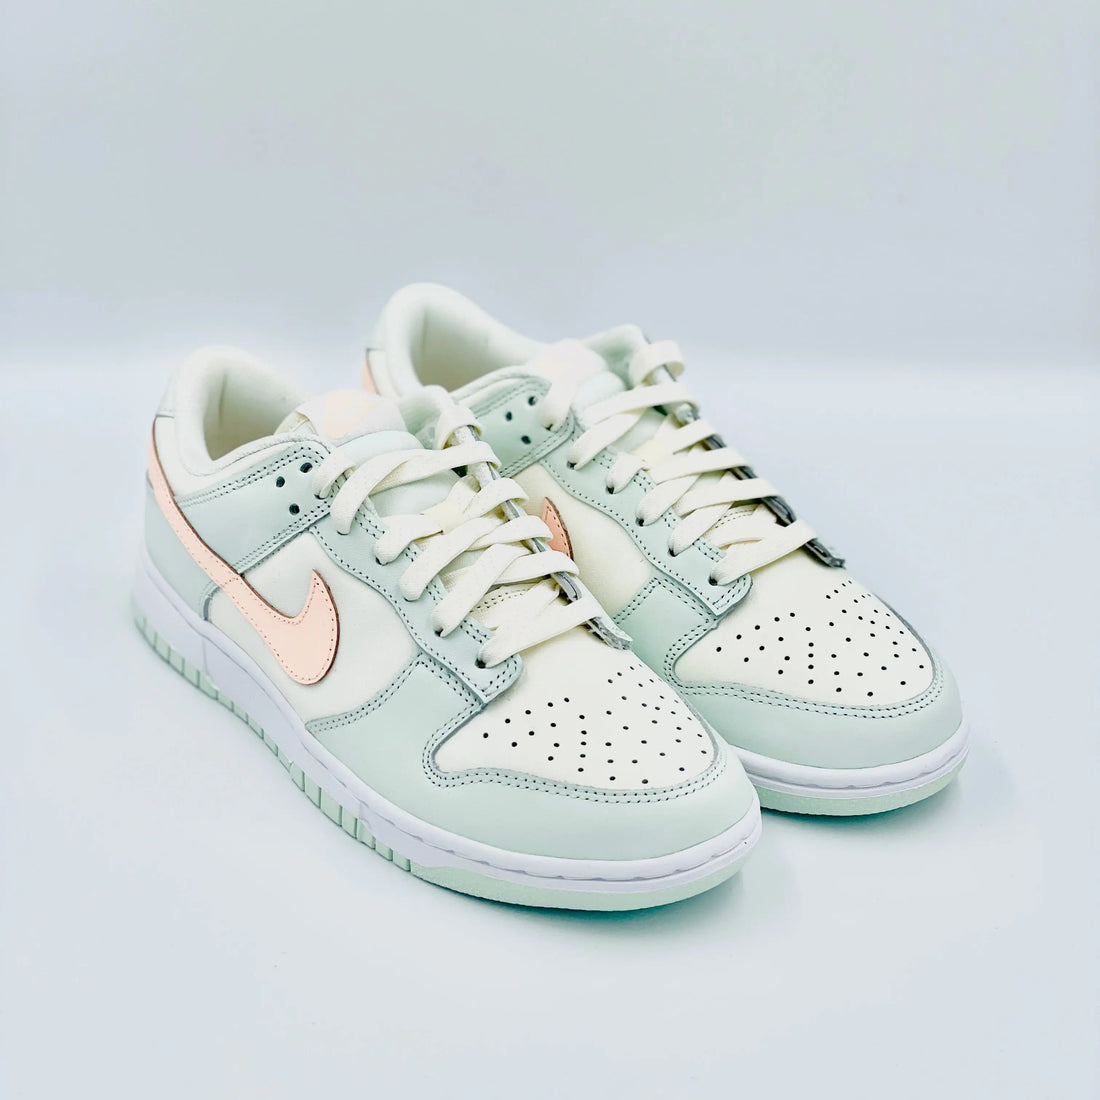 Shop the Nike Dunk Low 'Barely Green' (W) and discover the latest and hottest shoes from Air Jordan, Nike, Yeezy and more at SA Sneakers, your #1 online store for limited sneakers in Switzerland.